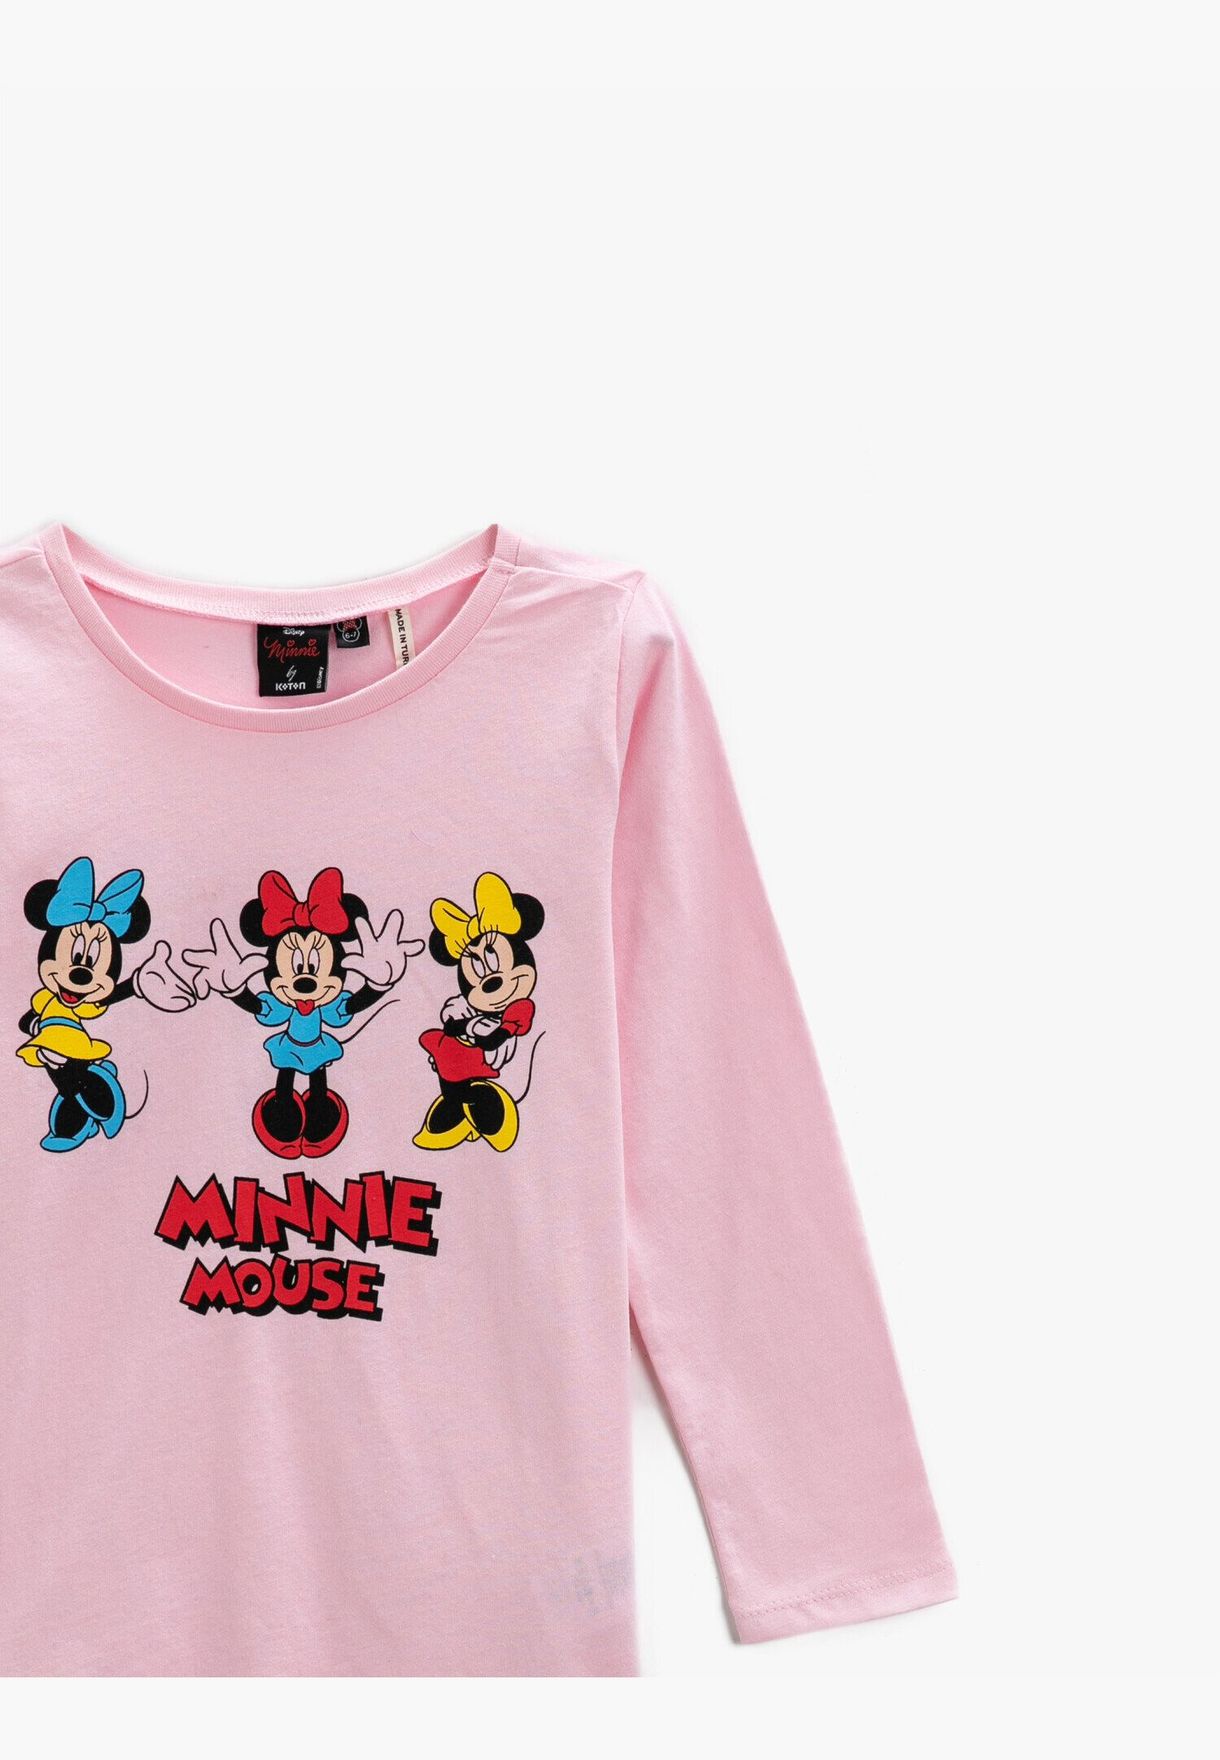 Minnie Mouse Printed Licensed Long Sleeve T-Shirt Cotton